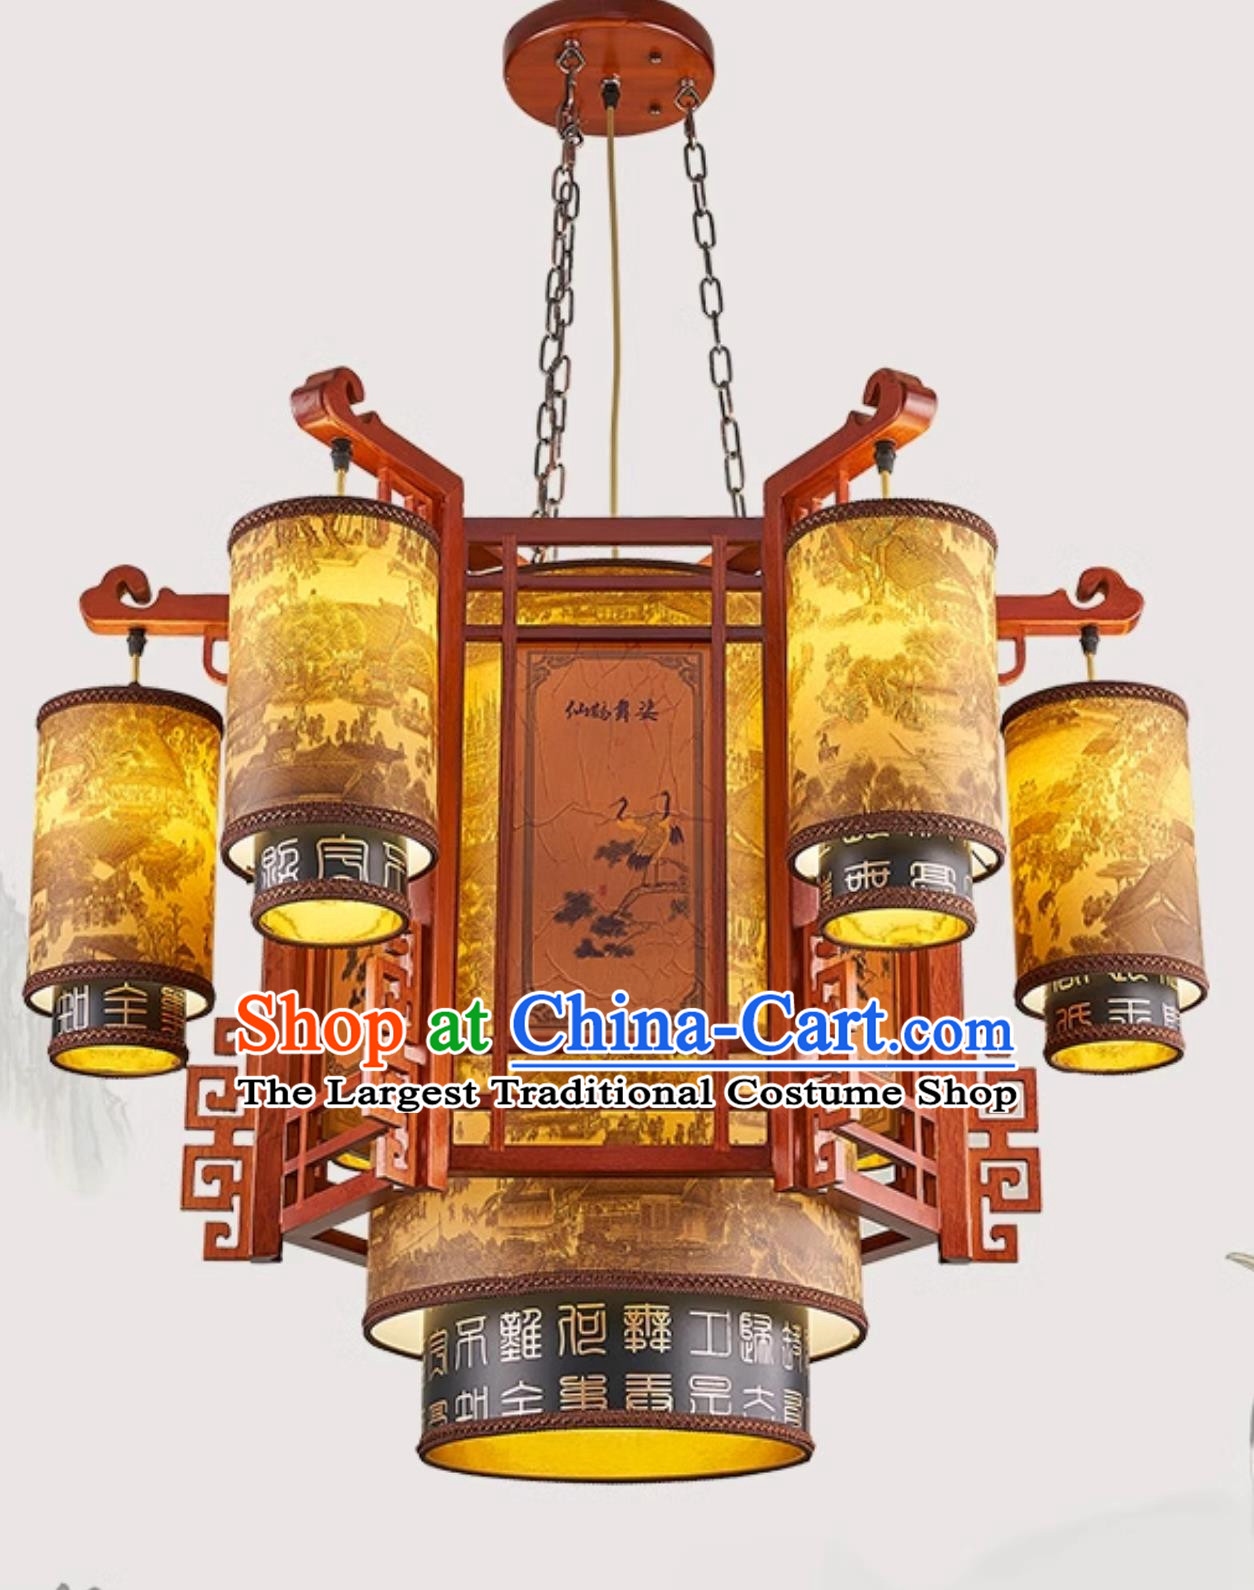 34 Inches Diameter Antique Chinese Chandelier Solid Wood Lantern Villa Tea House Headlight Hotel Chinese Style Palace Lantern